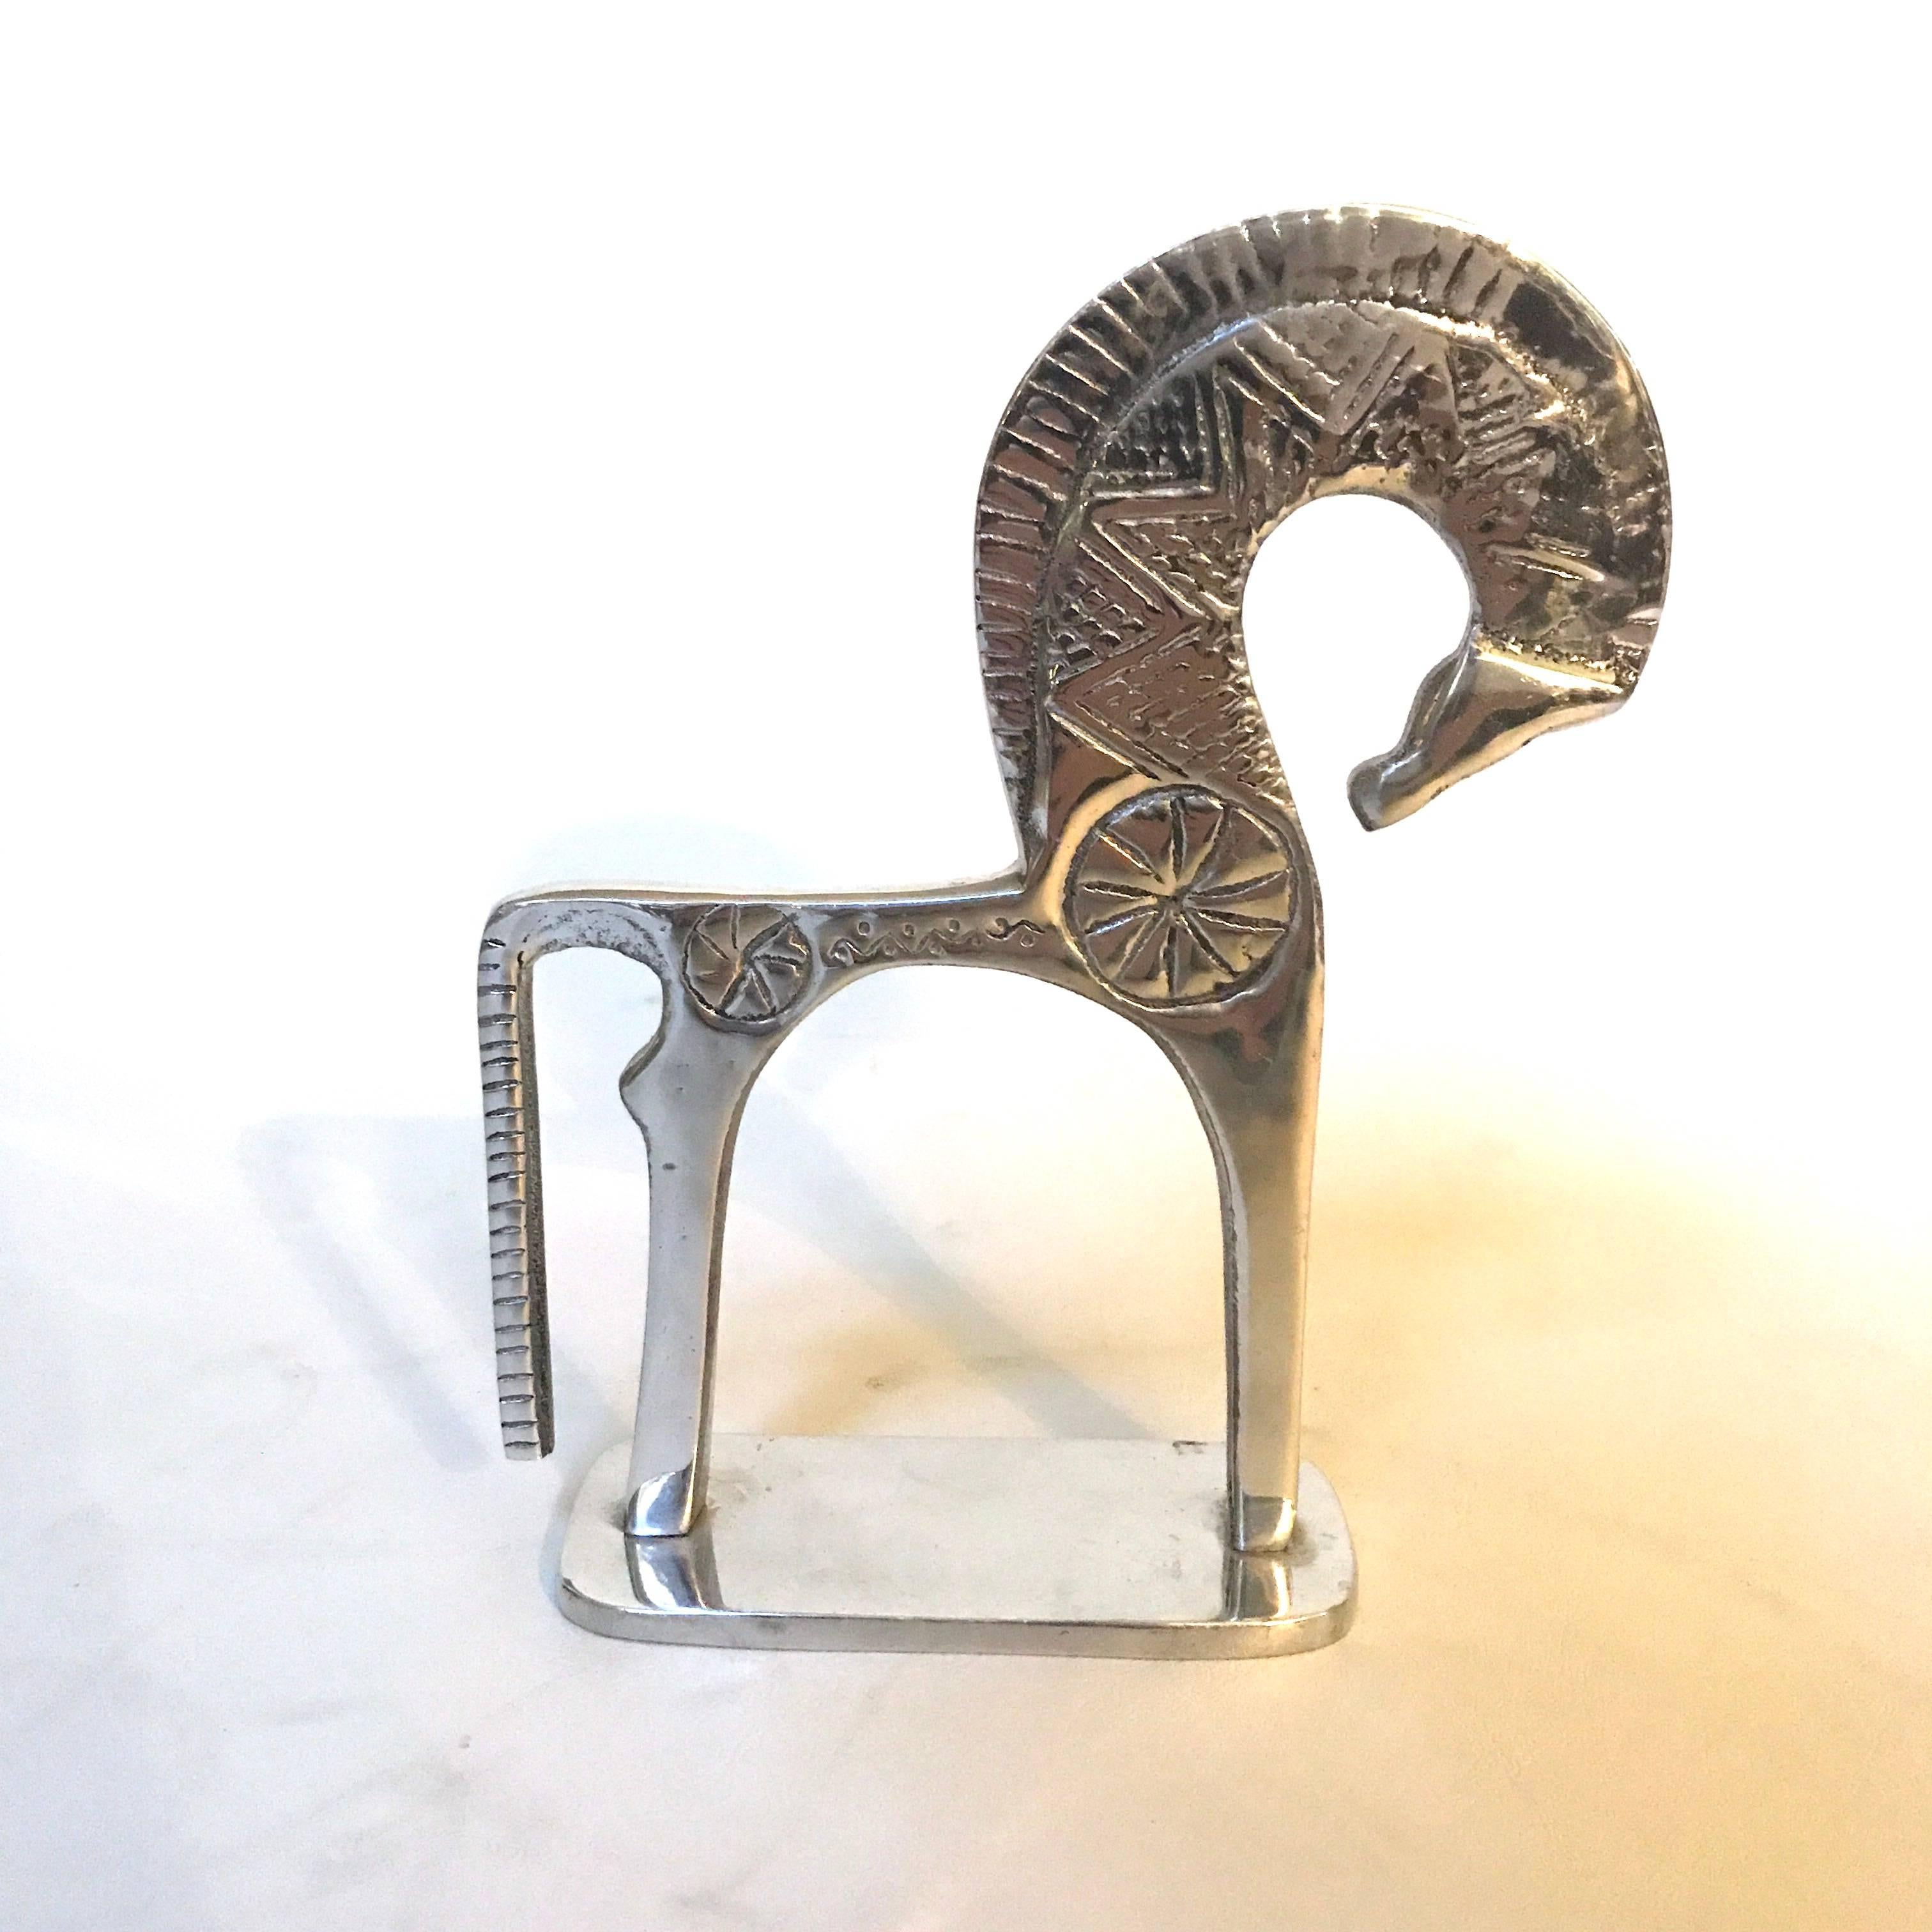 Vintage Mexican aluminium horse in the style of Frederick Weinberg. The horse is designed after Weinberg's midcentury interpretation of Etruscan designs. In excellent condition.